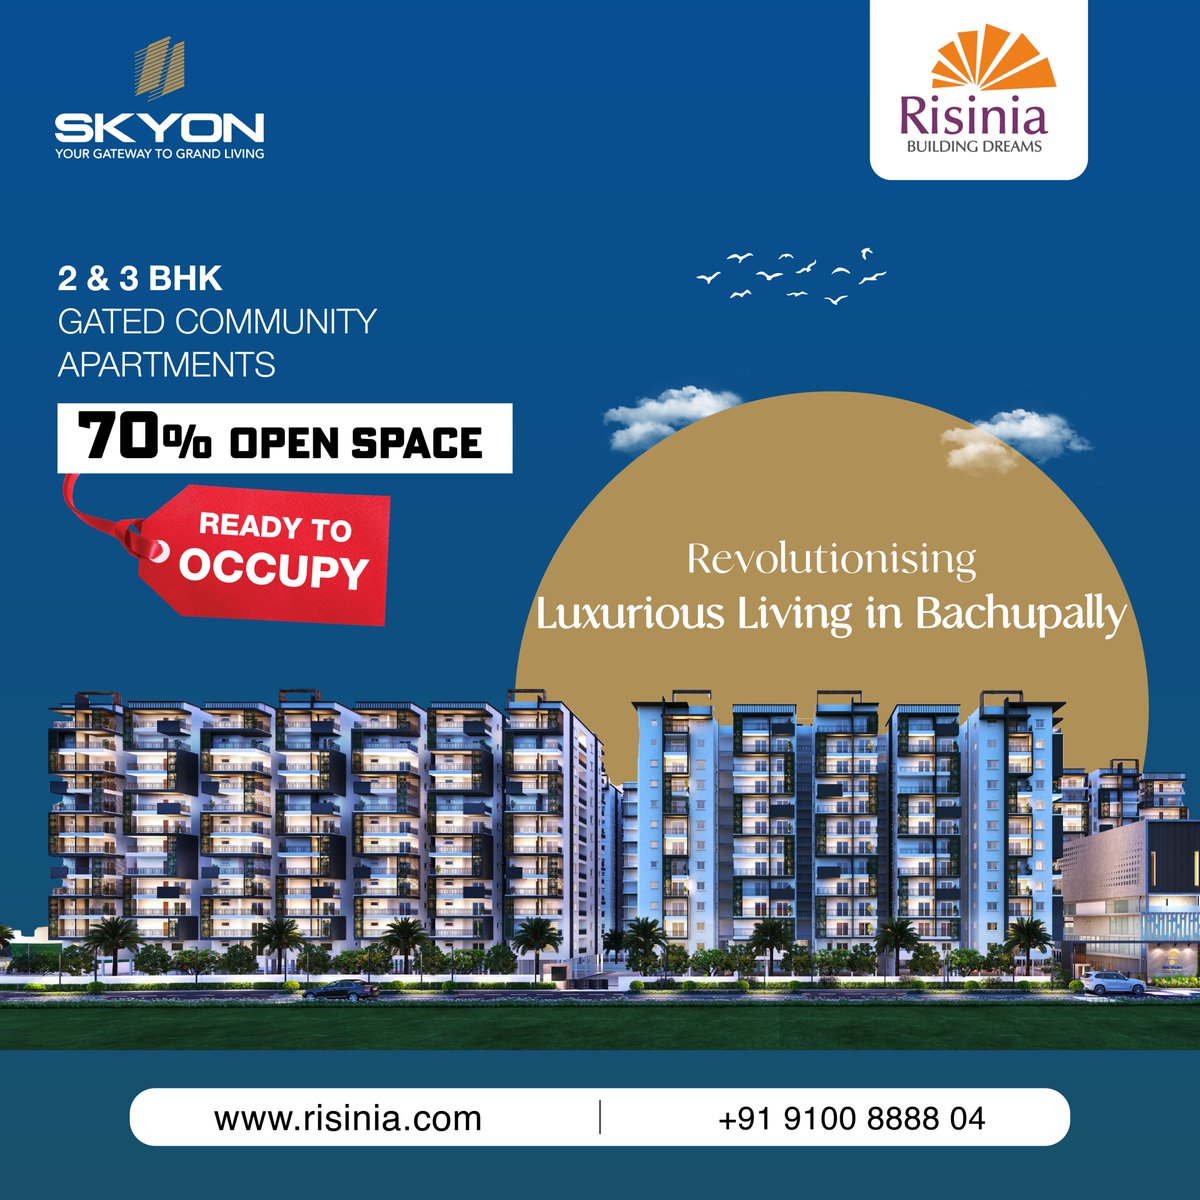 Luxury living at Skyon is crafted to perfection, featuring top-notch architecture, world-class amenities, and uber-premium facilities.

For more details visit our website: risinia.com/projects/curre…

#risinia #risiniabuilders #risiniaskyon #2bhkflatsforsale #3bhkflatsforsale